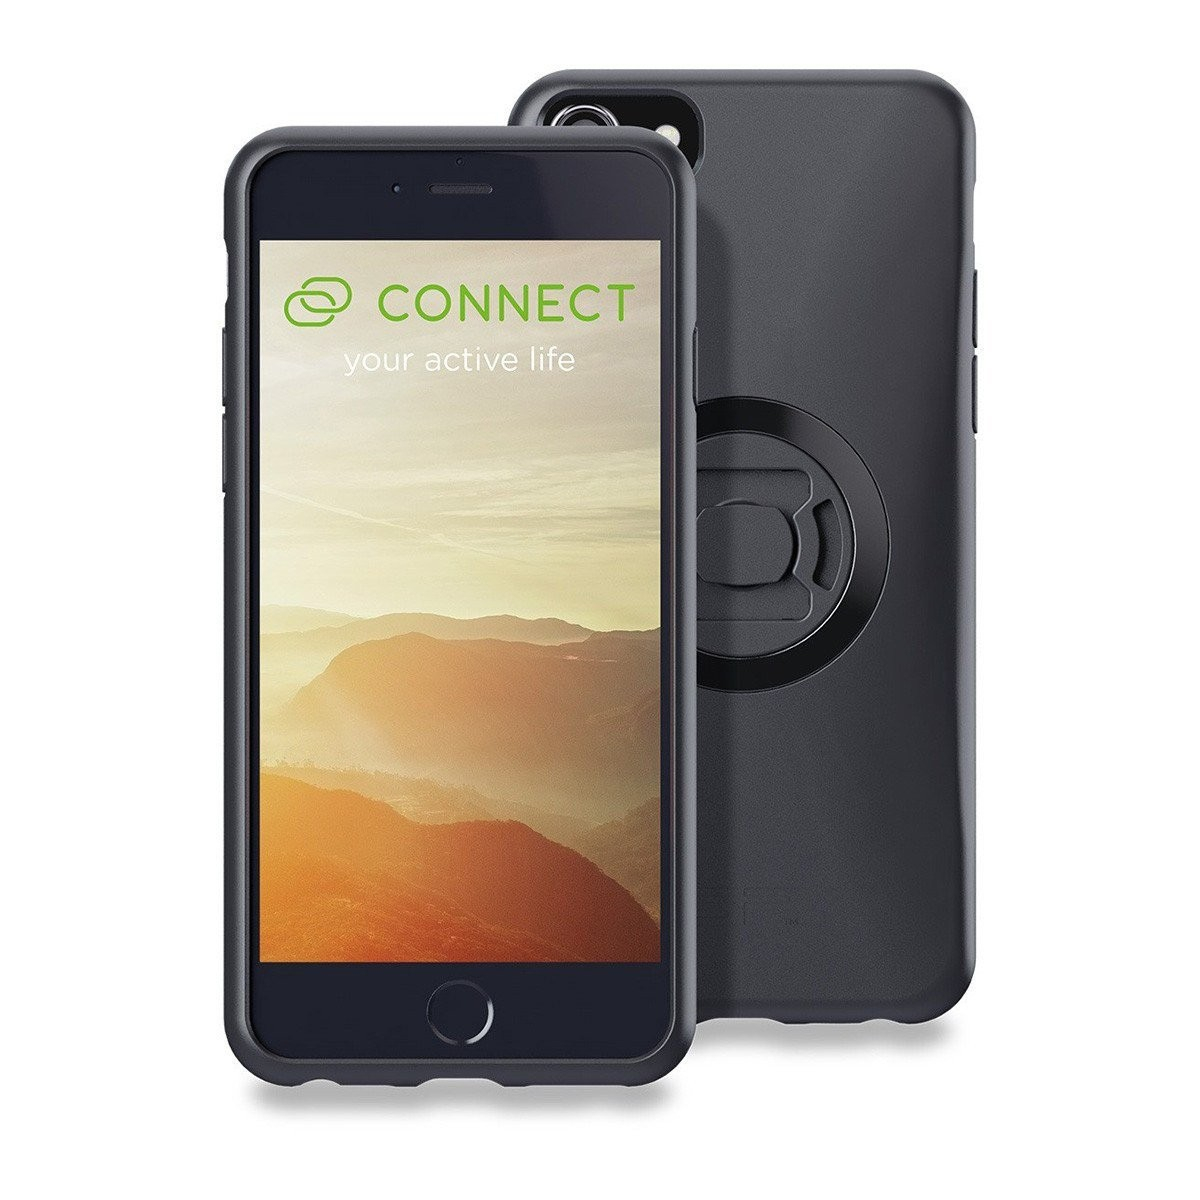 Carcasa functionala SP Connect iPhone 7+/6s+/6+ 7/6s/6